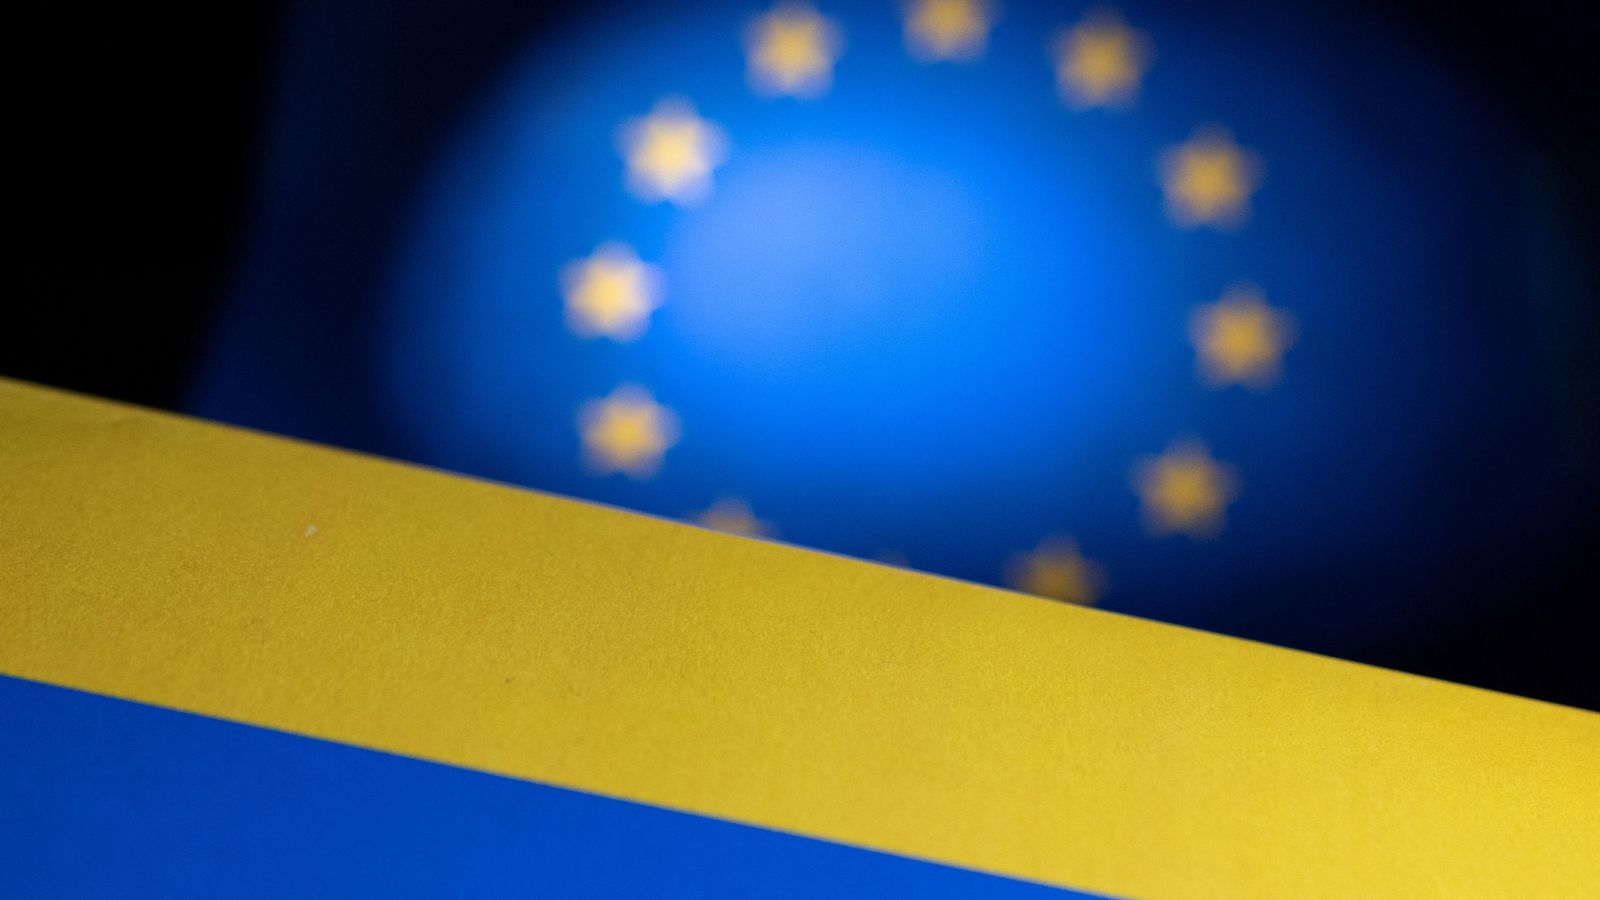 Other EU Hopefuls Worry They May Have Been Thrown Behind Ukraine In Membership Queue